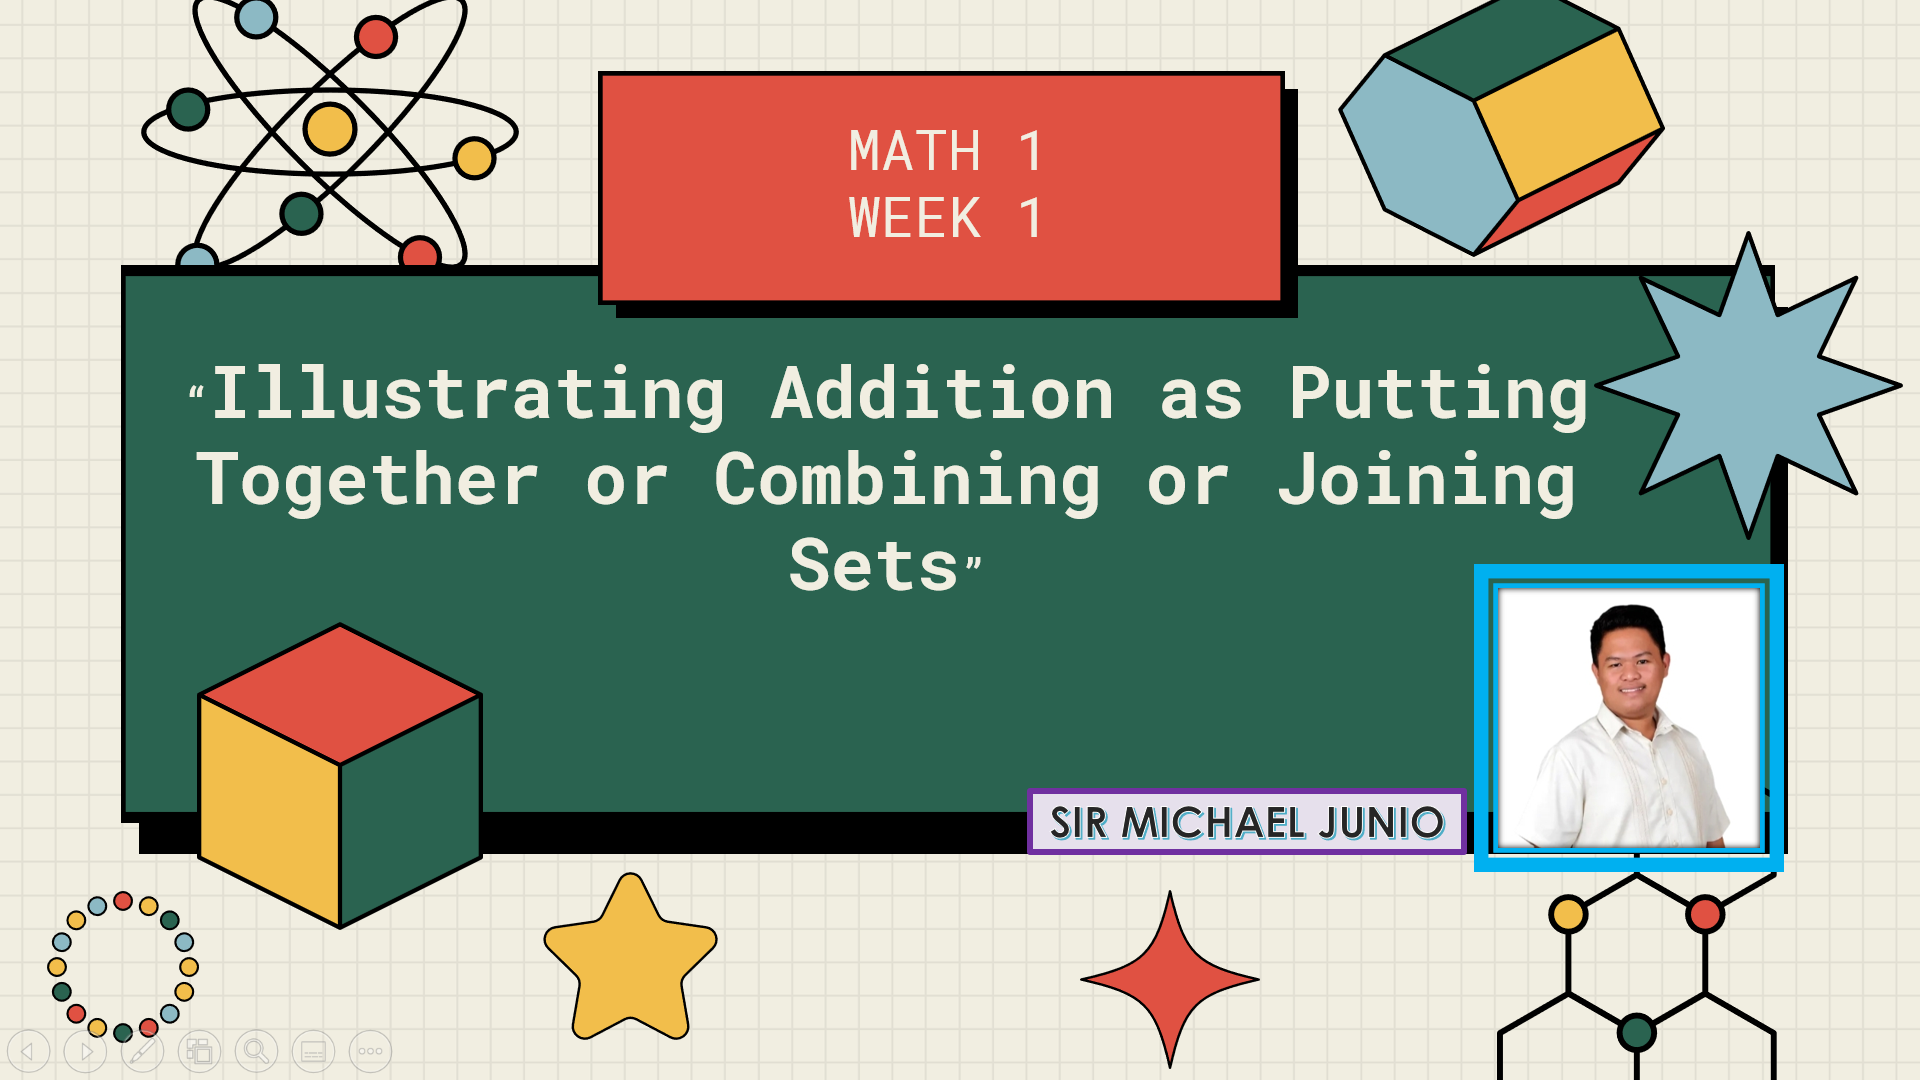 136968-Sen. Benigno S. Aquino Jr. Elementary School-Mathematics 1-Quarter 2-Module 1:Illustrating Addition as Putting Together or Combining or Joining Sets